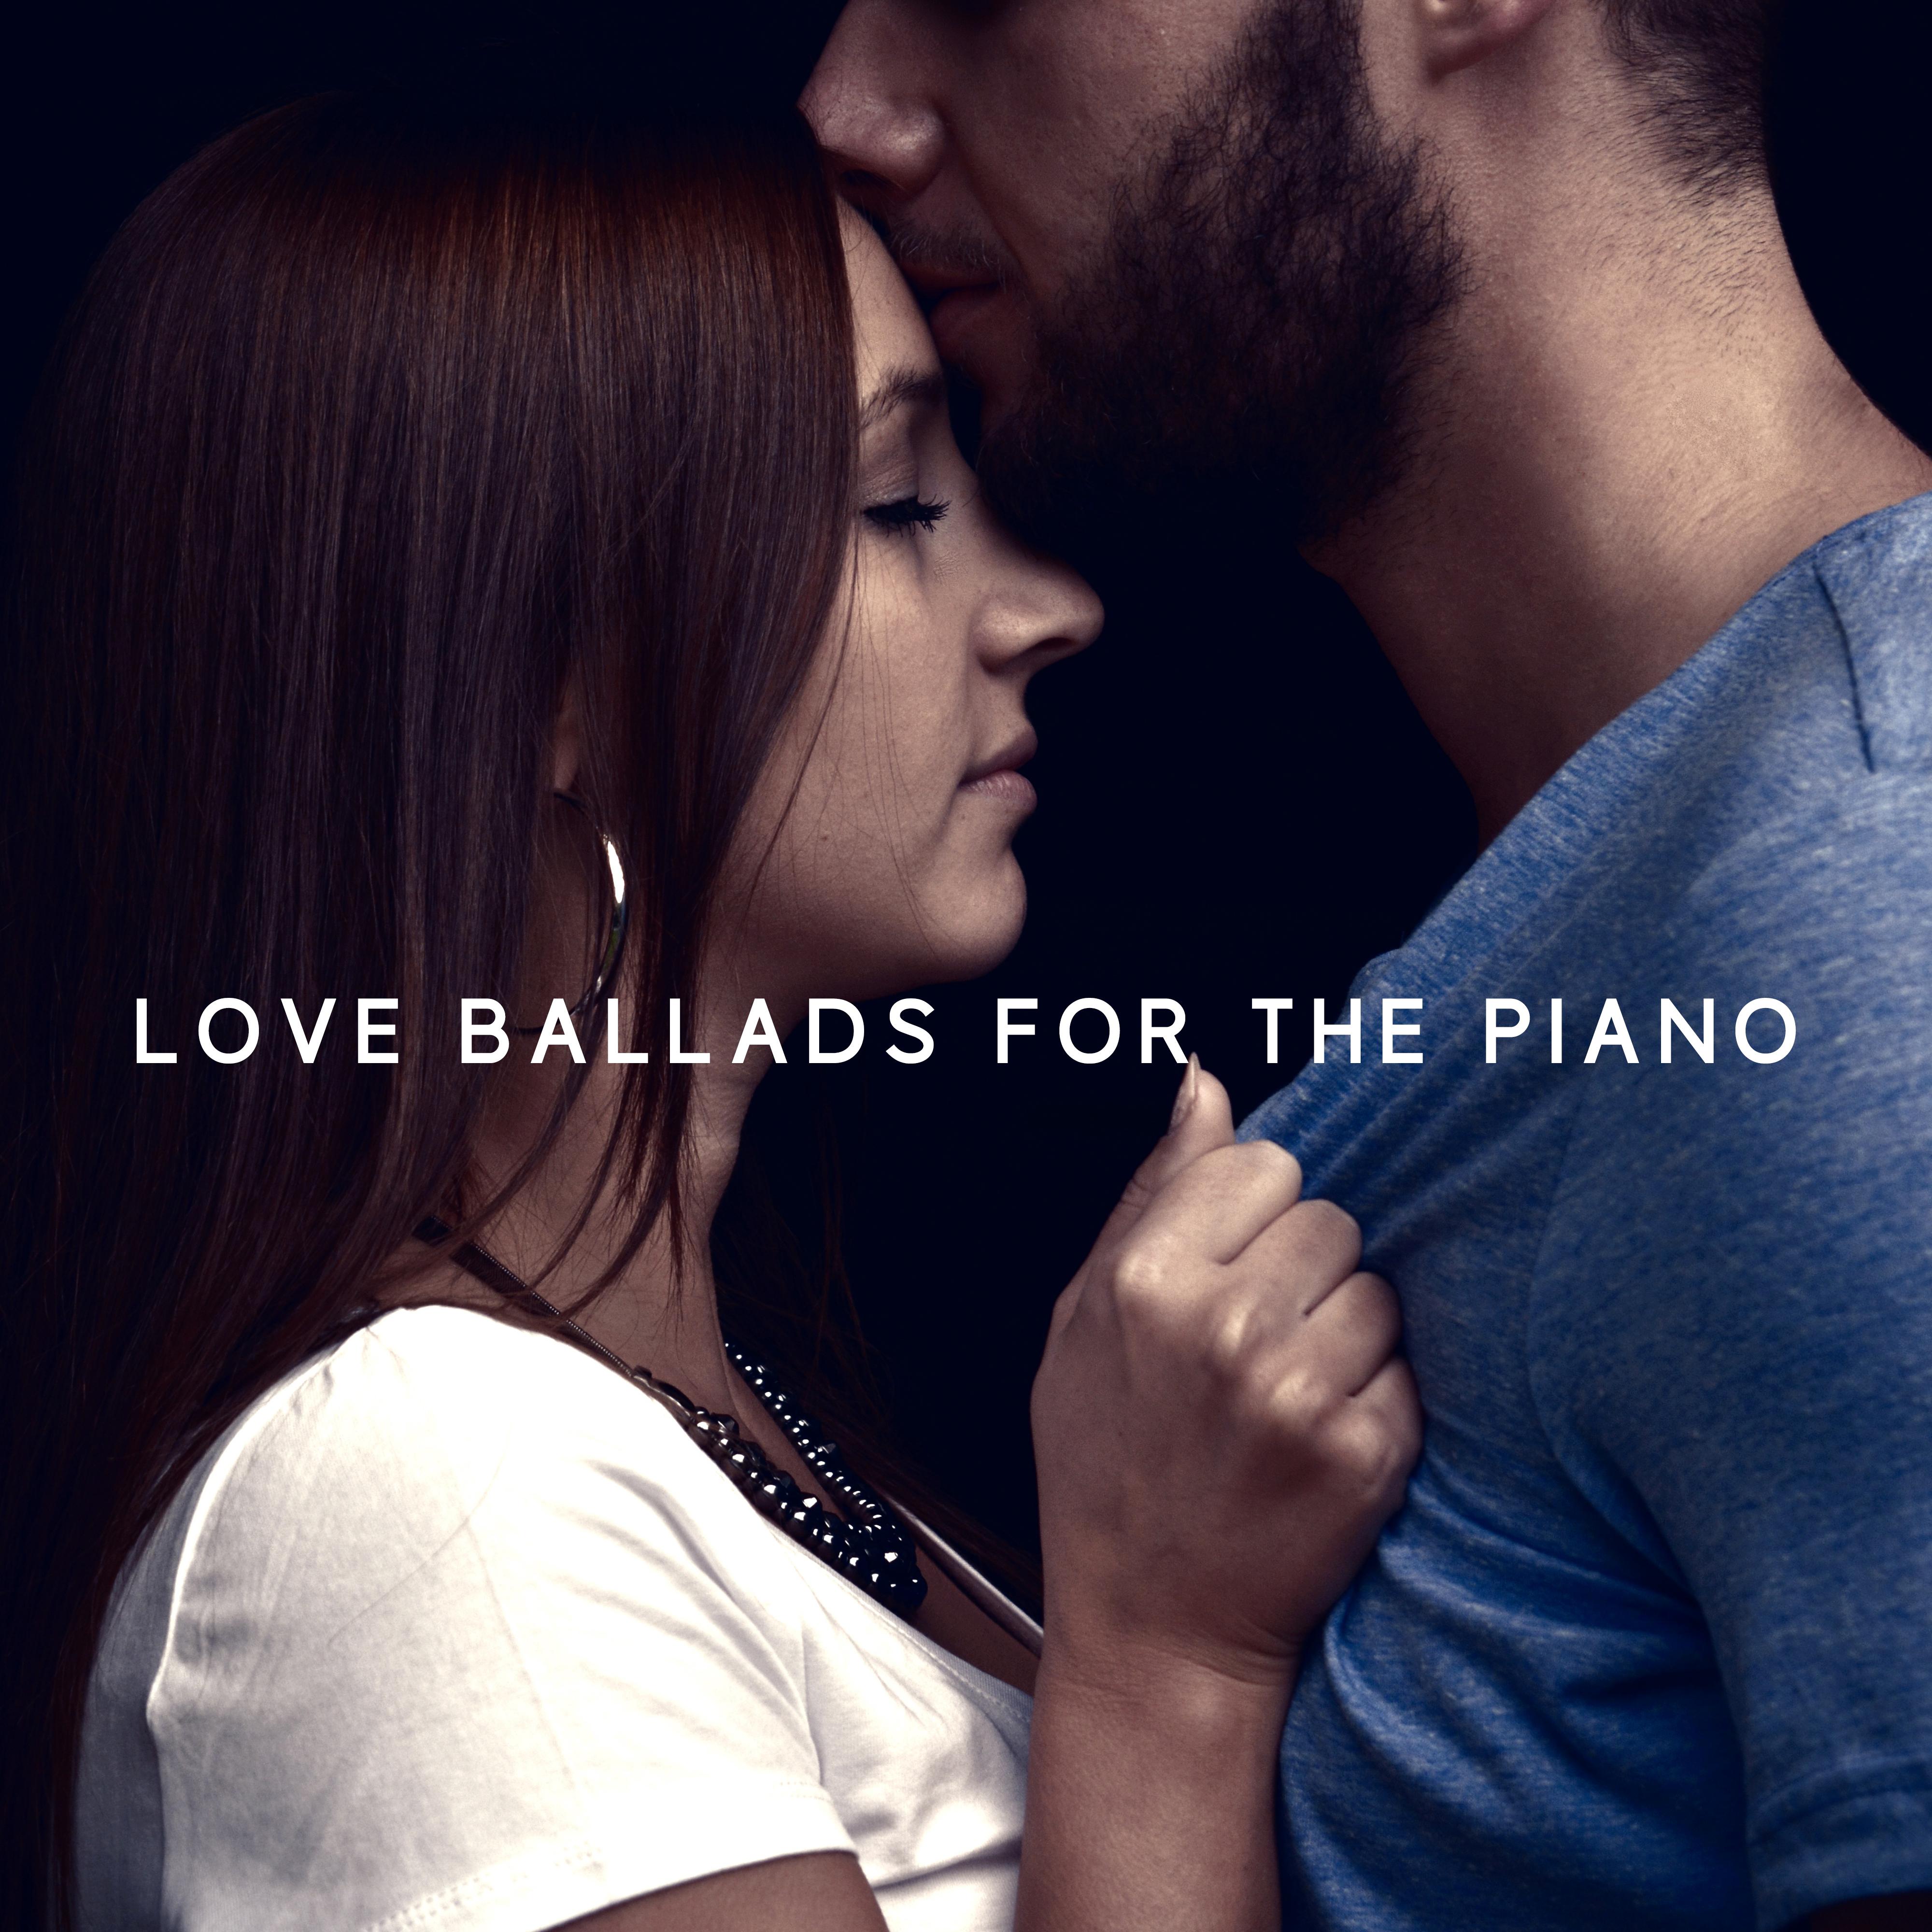 Love Ballads for the Piano - The Most Beautiful Instrumental Love Compositions From 2019